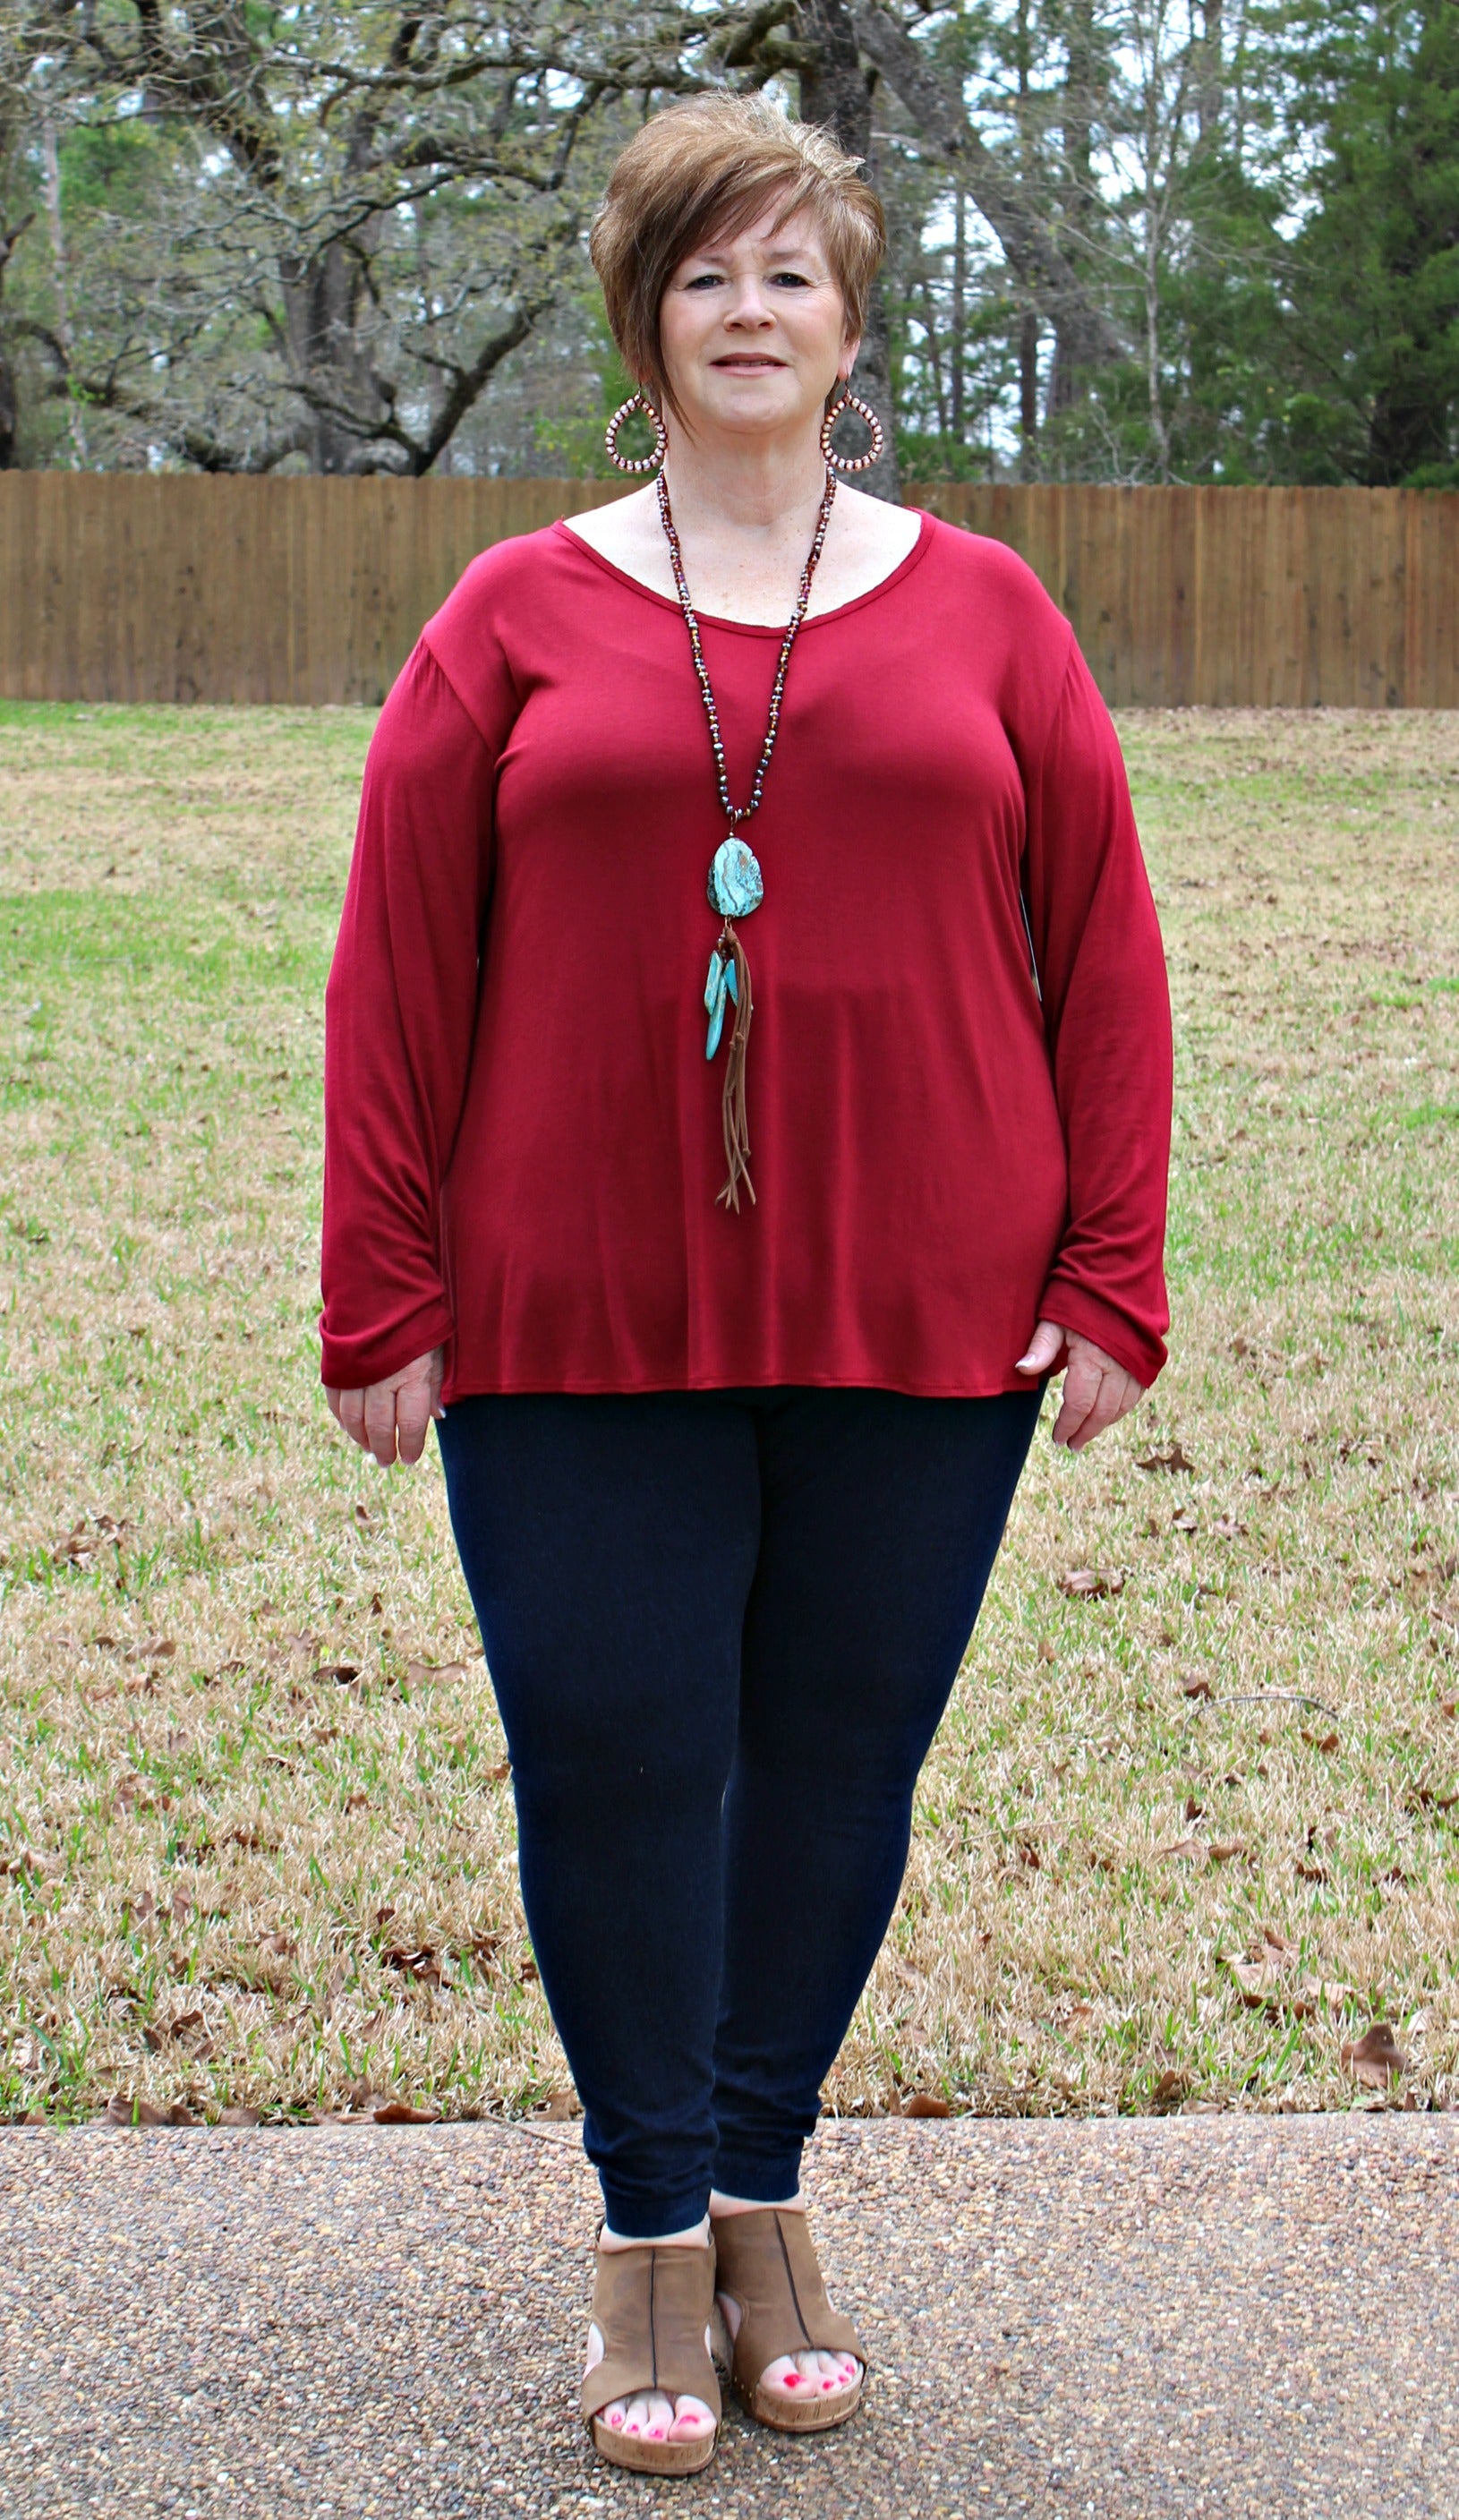 Ever So Casual Long Sleeve Top in Maroon - Giddy Up Glamour Boutique